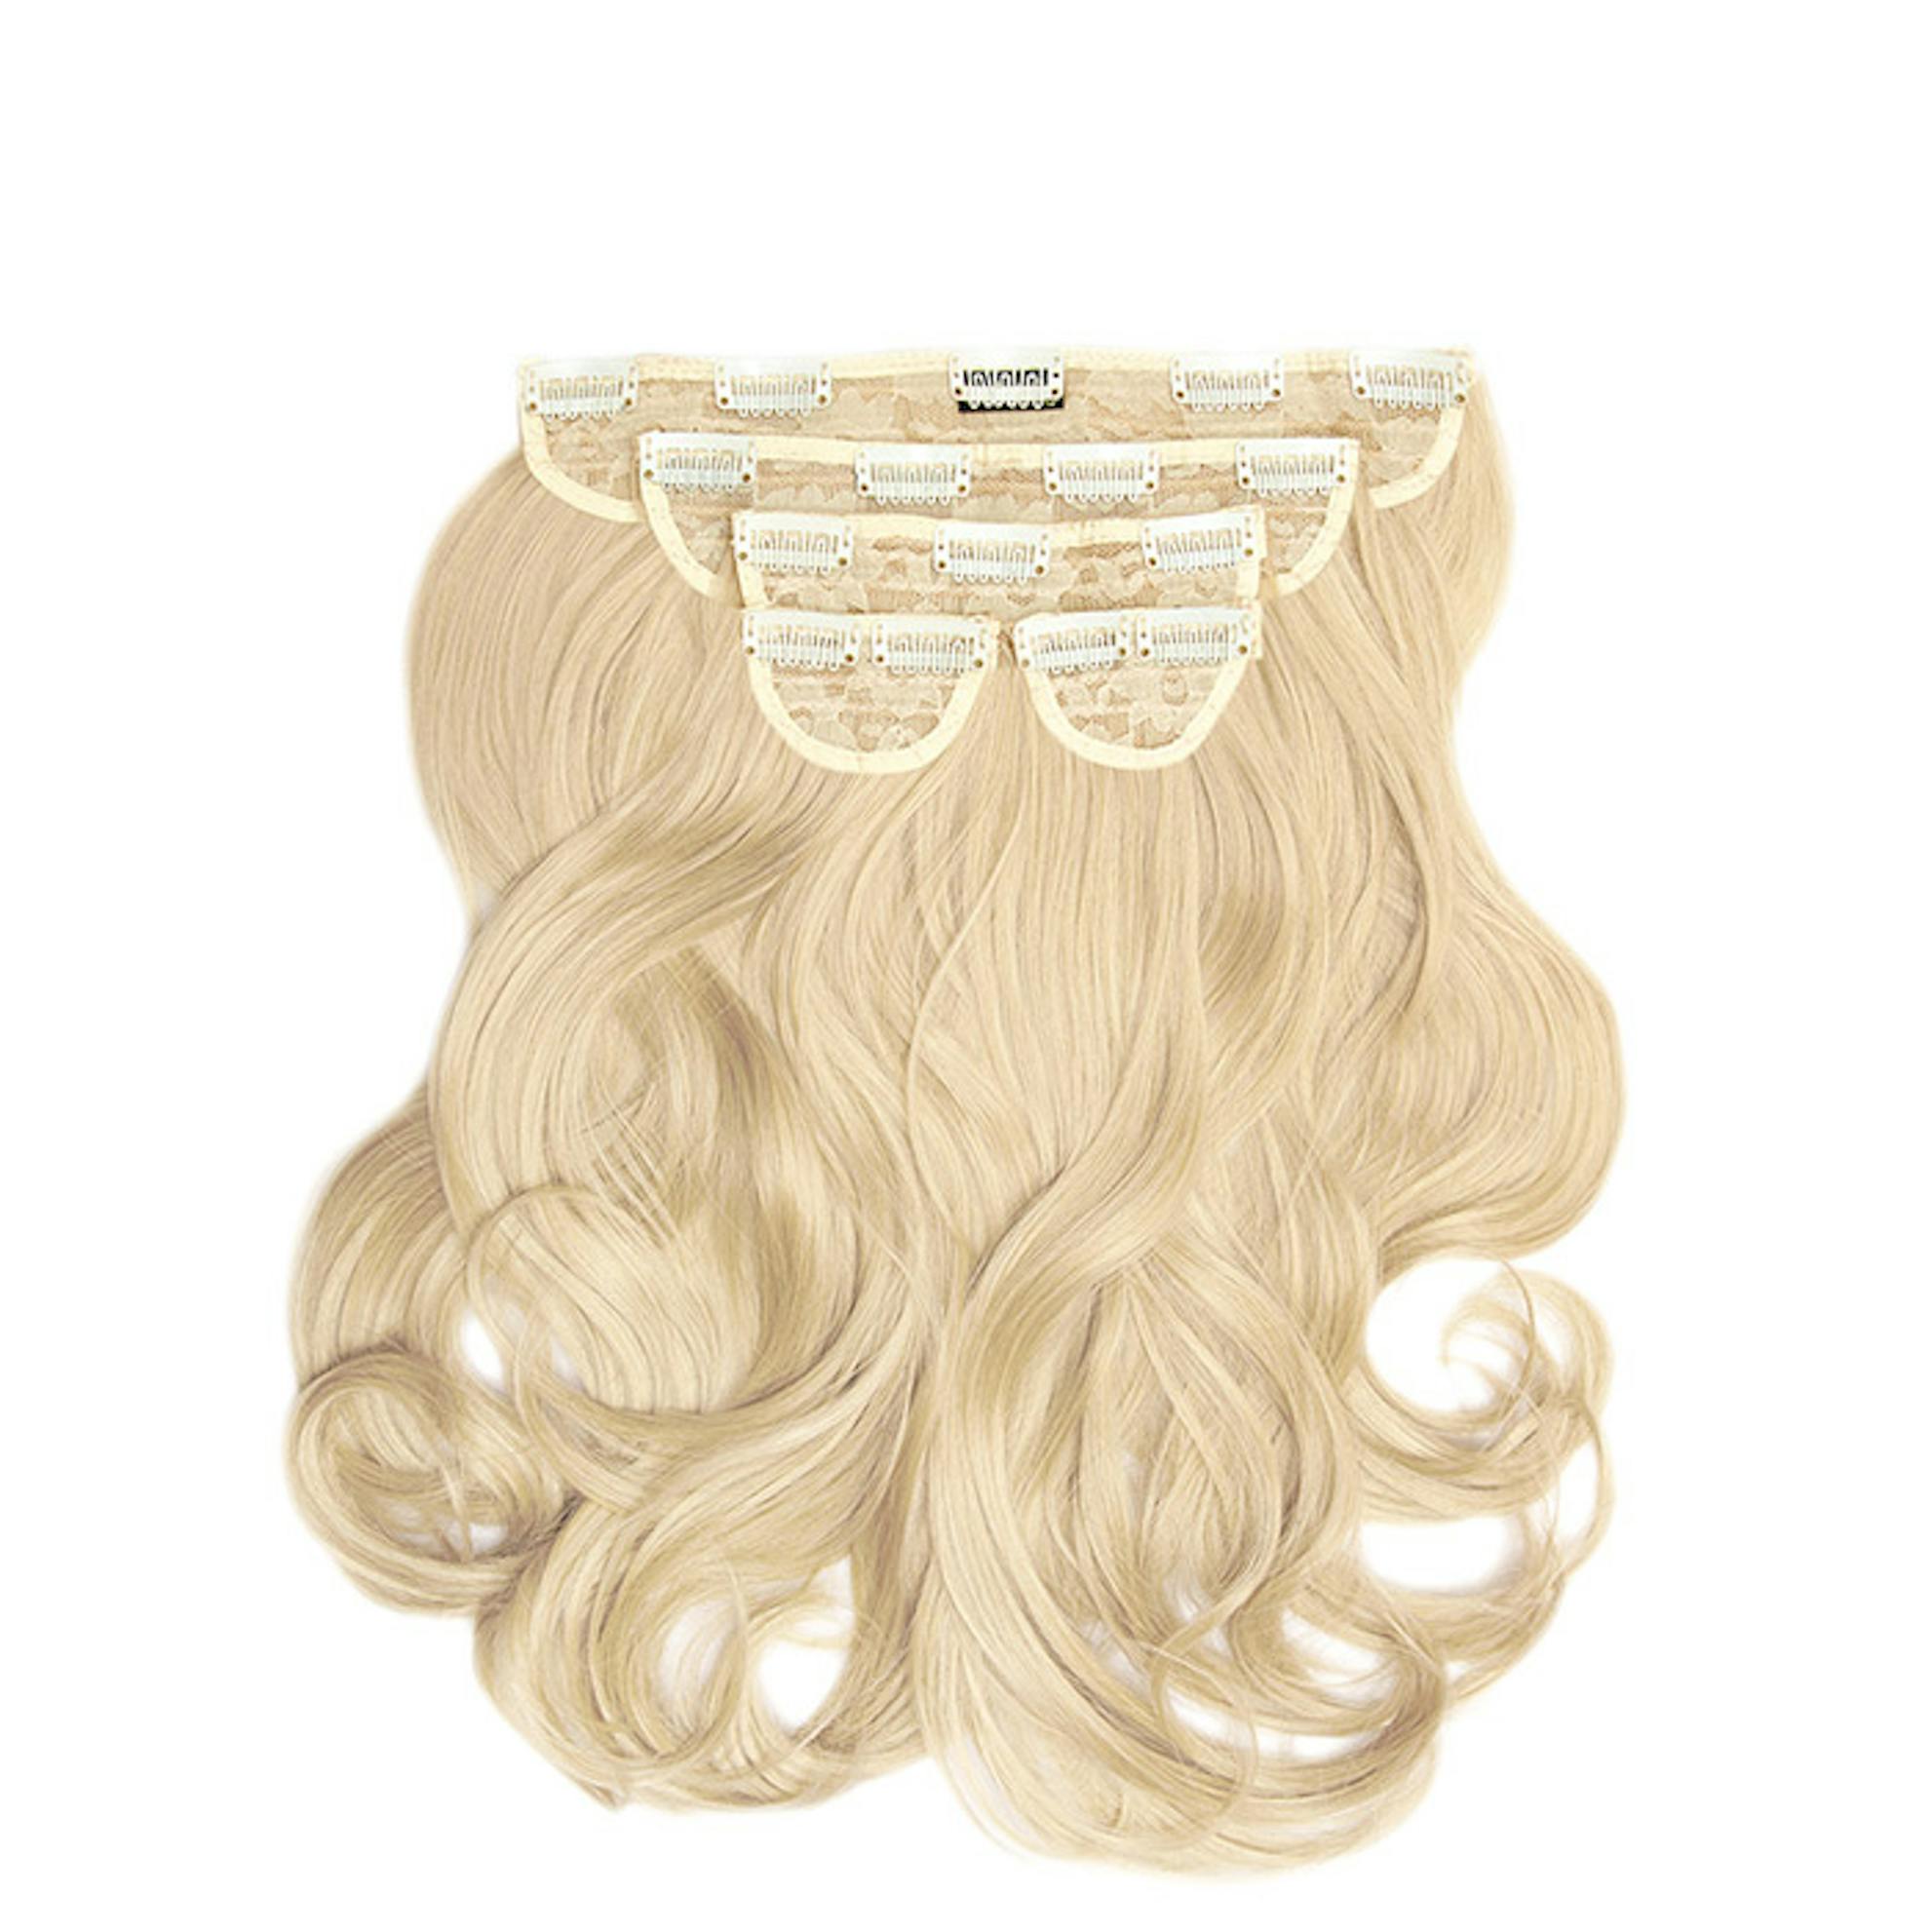 Thick 20 1 Piece Curly Clip In Hair Extensions - Lullabellz